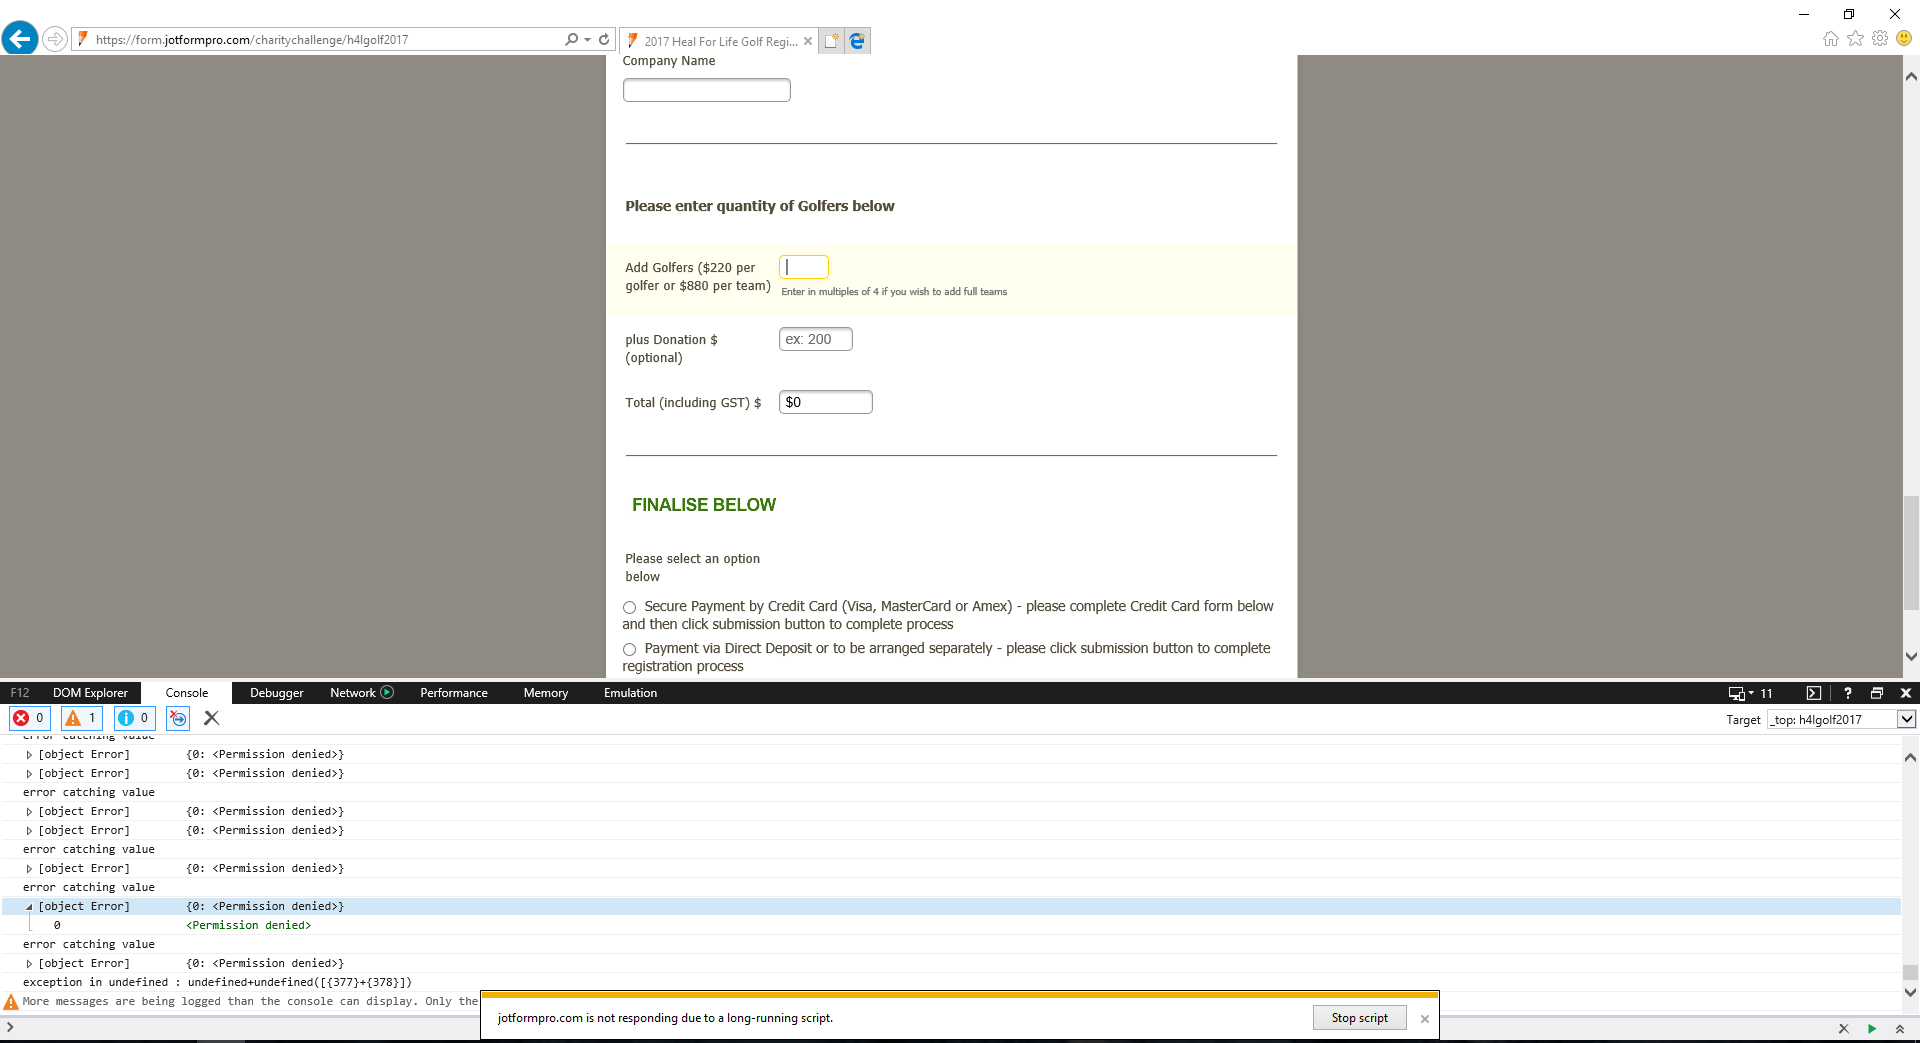 Conditional Logic: form is freezing when conditions are triggered in the form Image 2 Screenshot 41